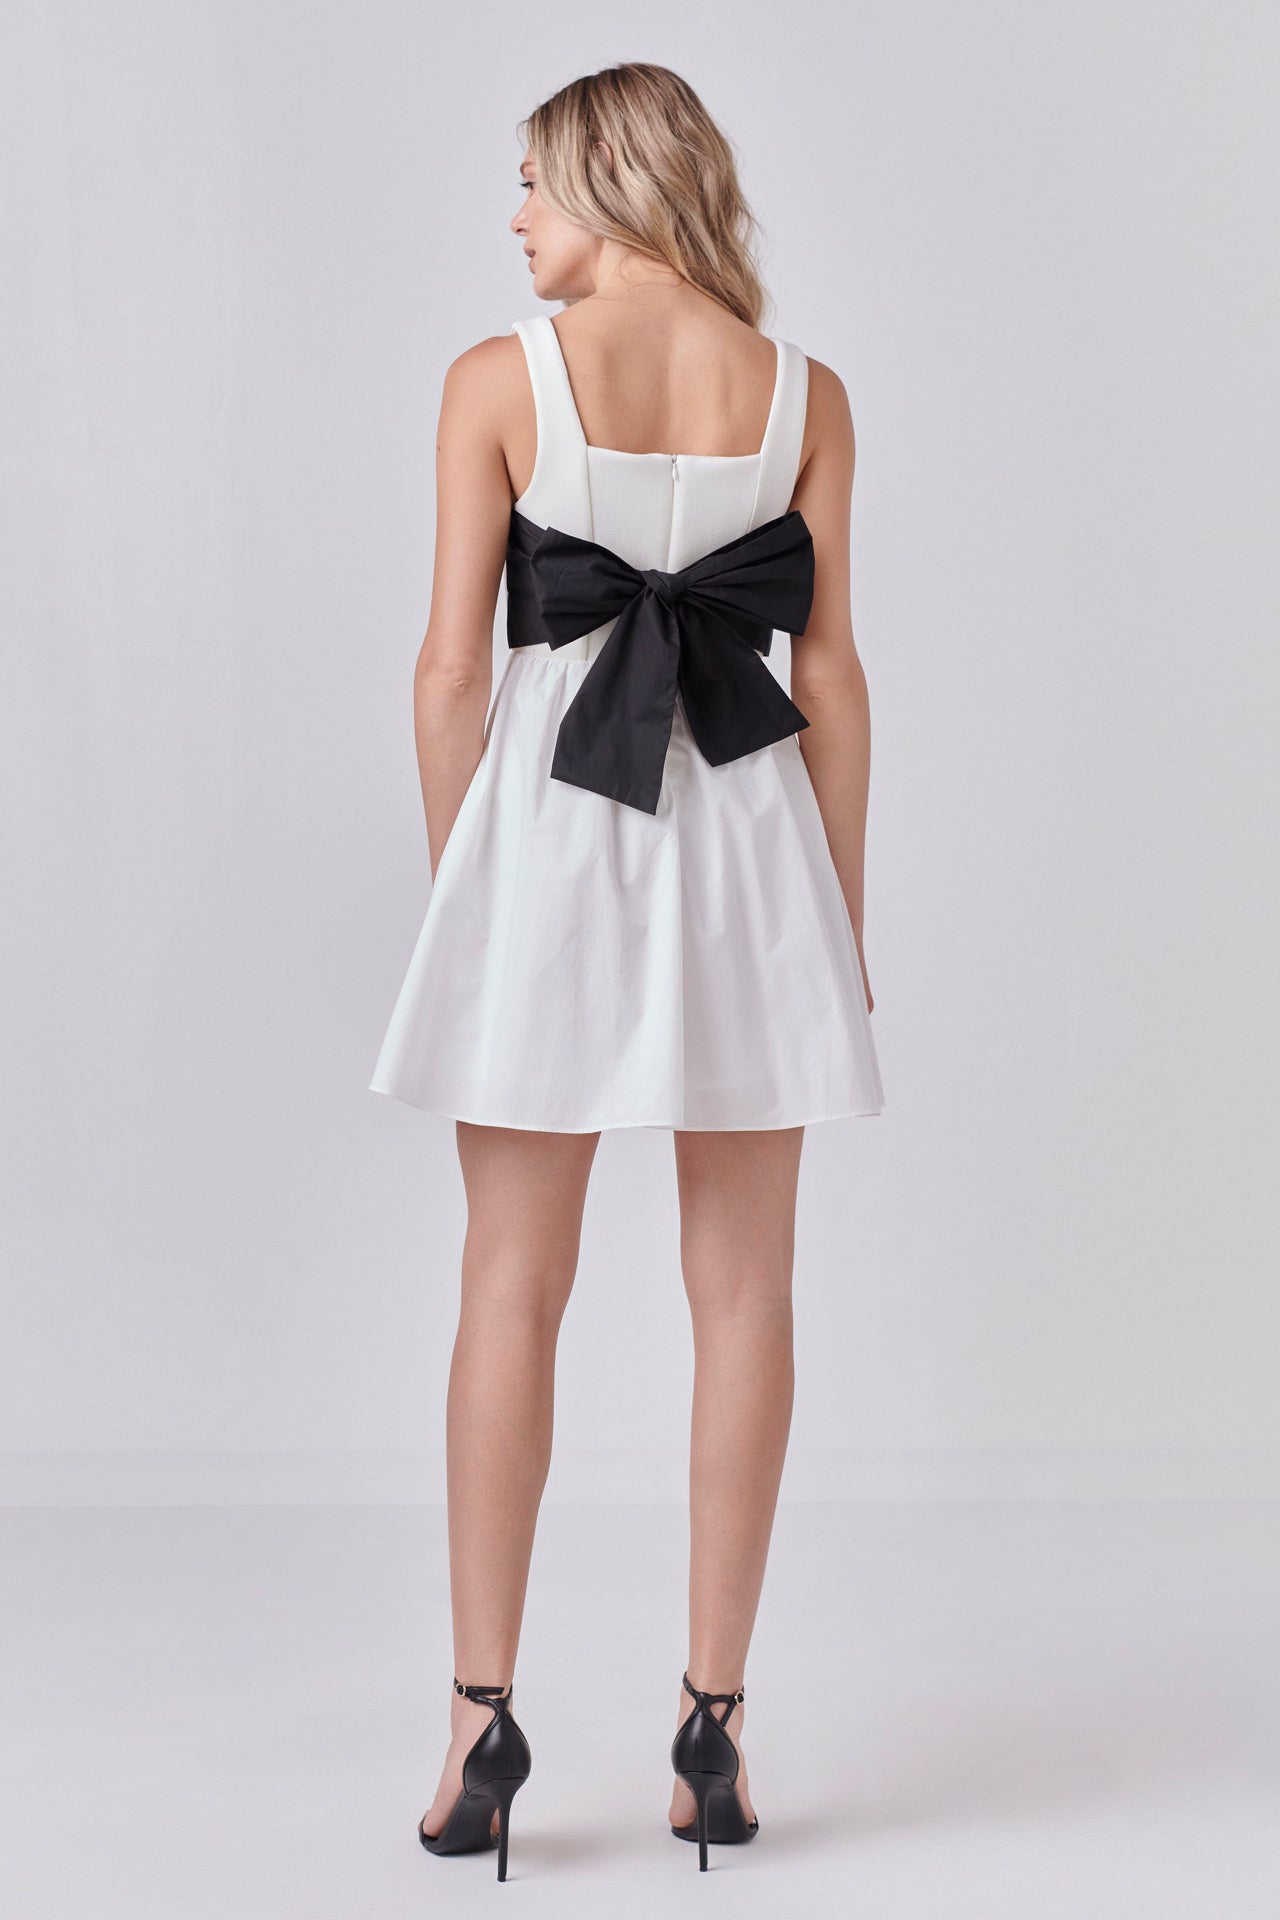 ENDLESS ROSE - Back Bow Contrast Dress - DRESSES available at Objectrare